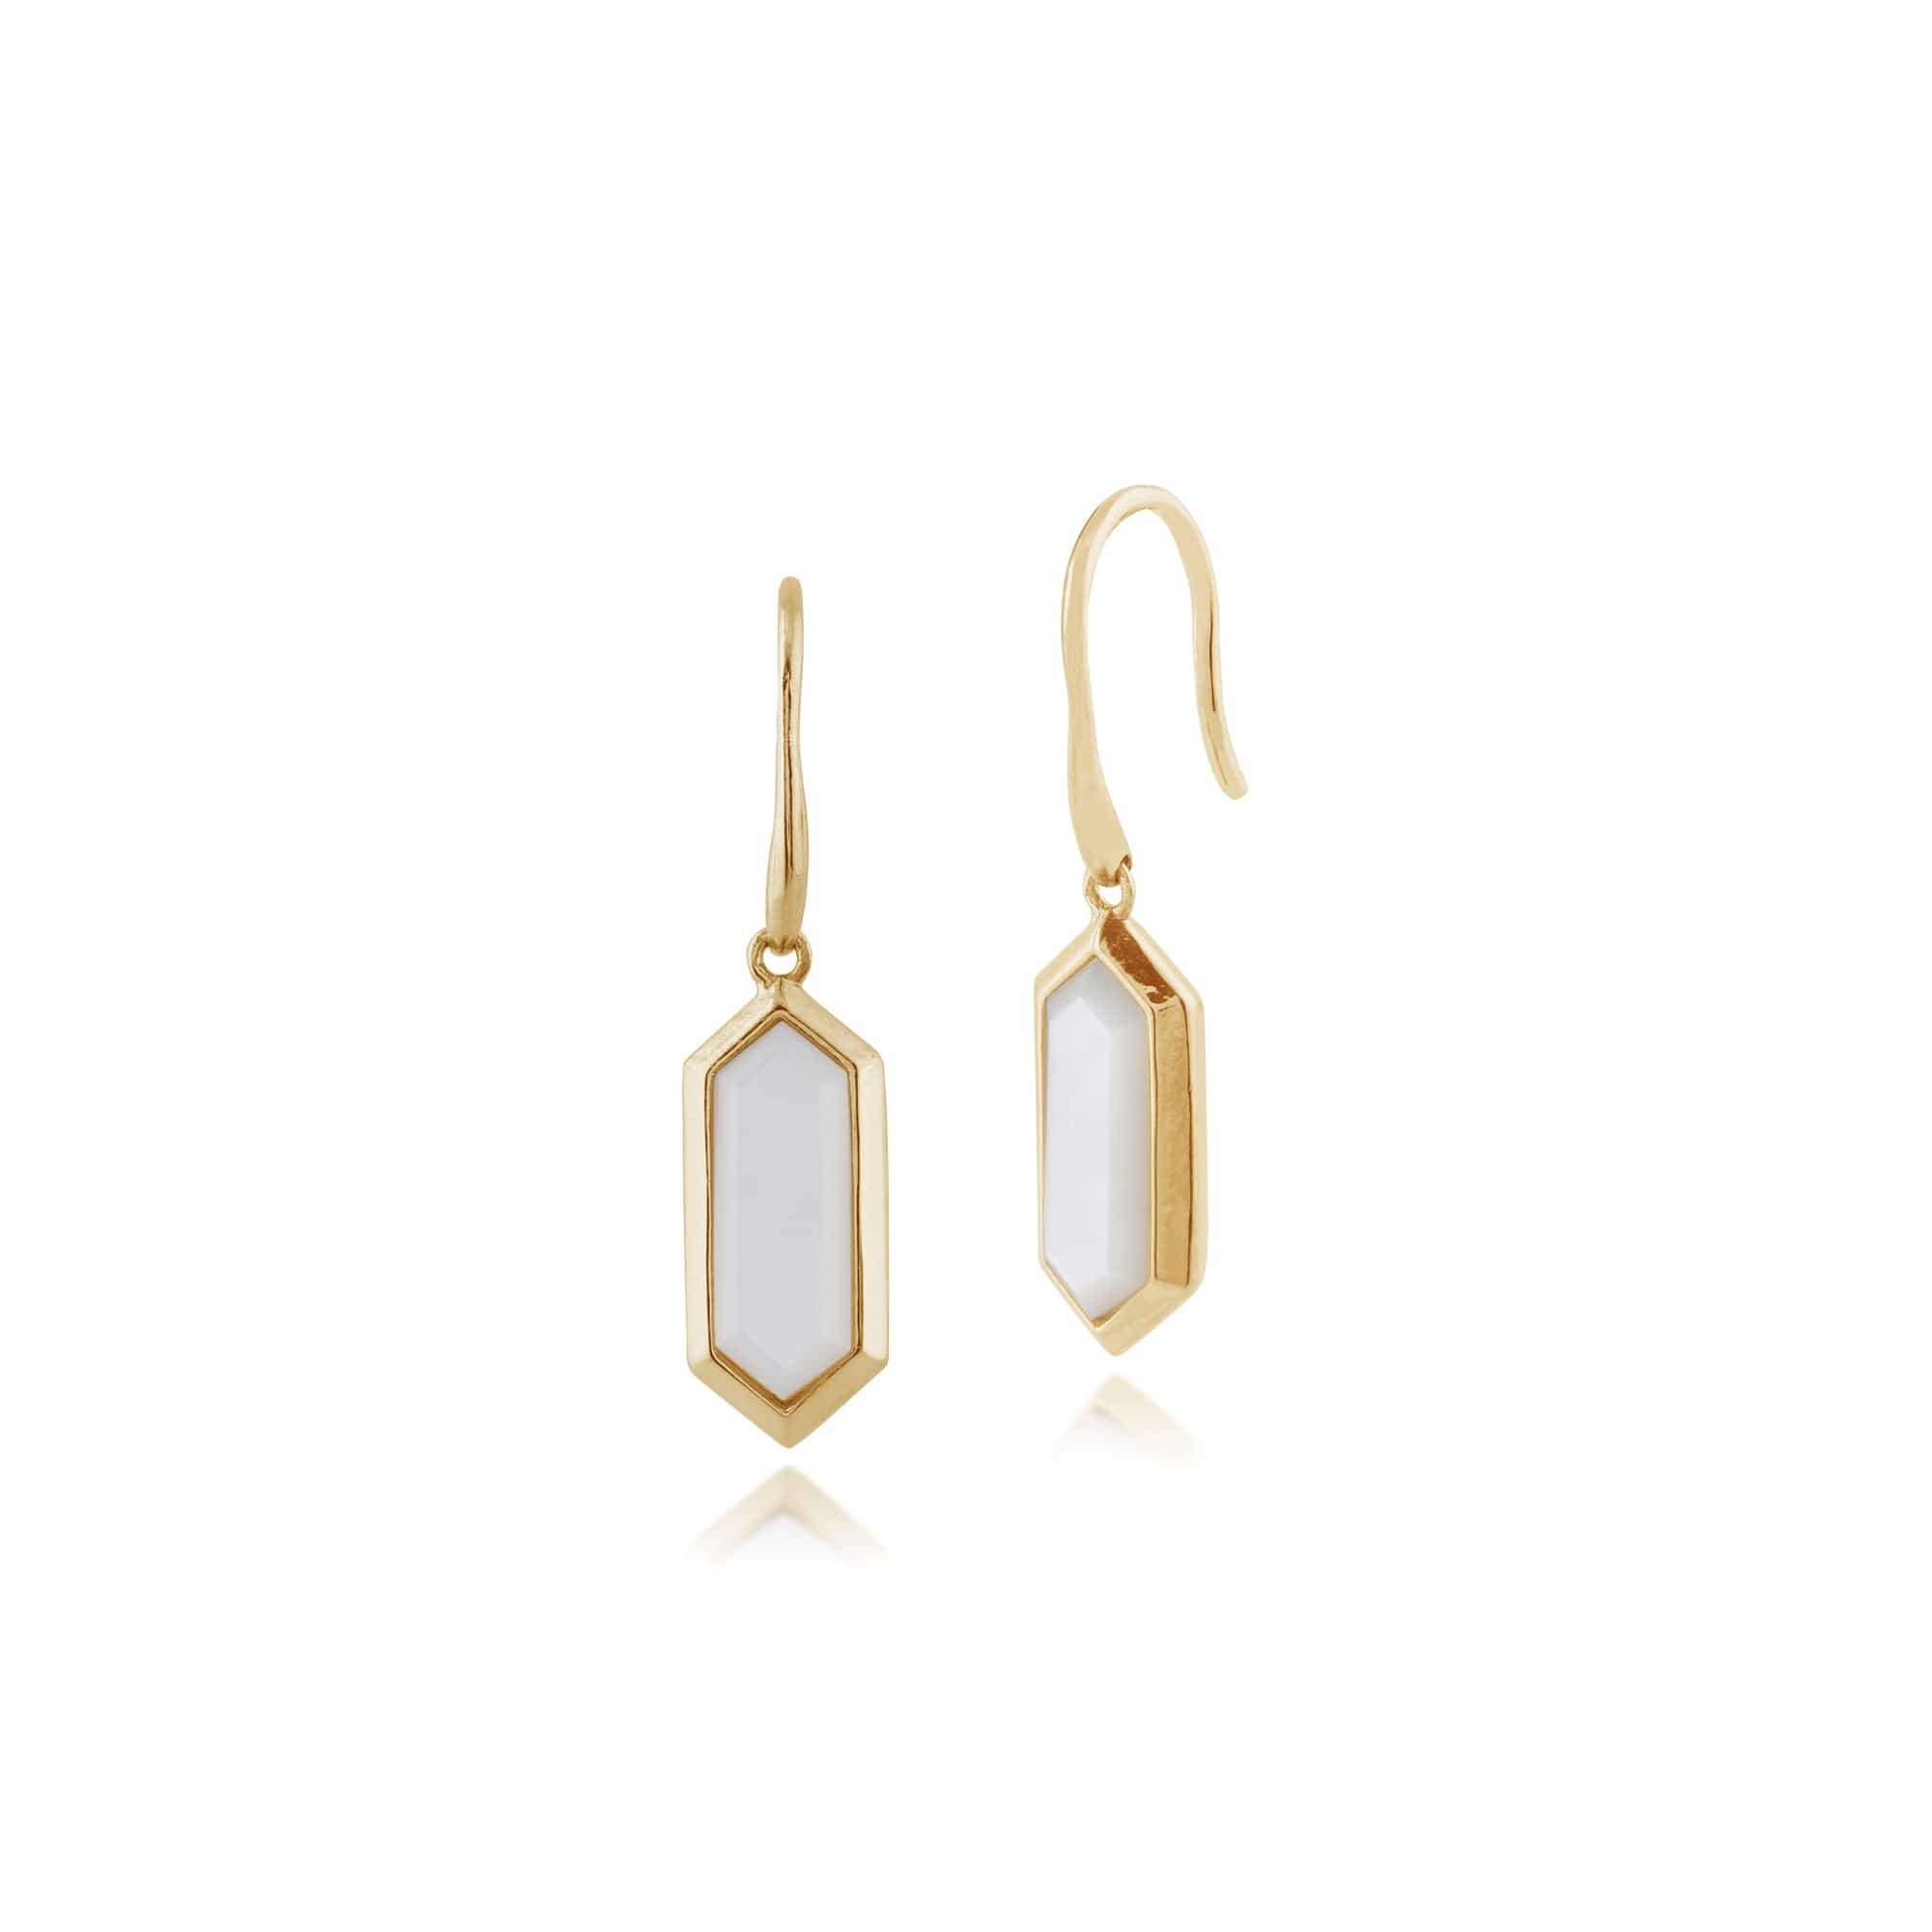 Gemondo 925 Gold Plated Silver 2ct Mother of Pearl Hexagonal Prism Drop Earrings Image